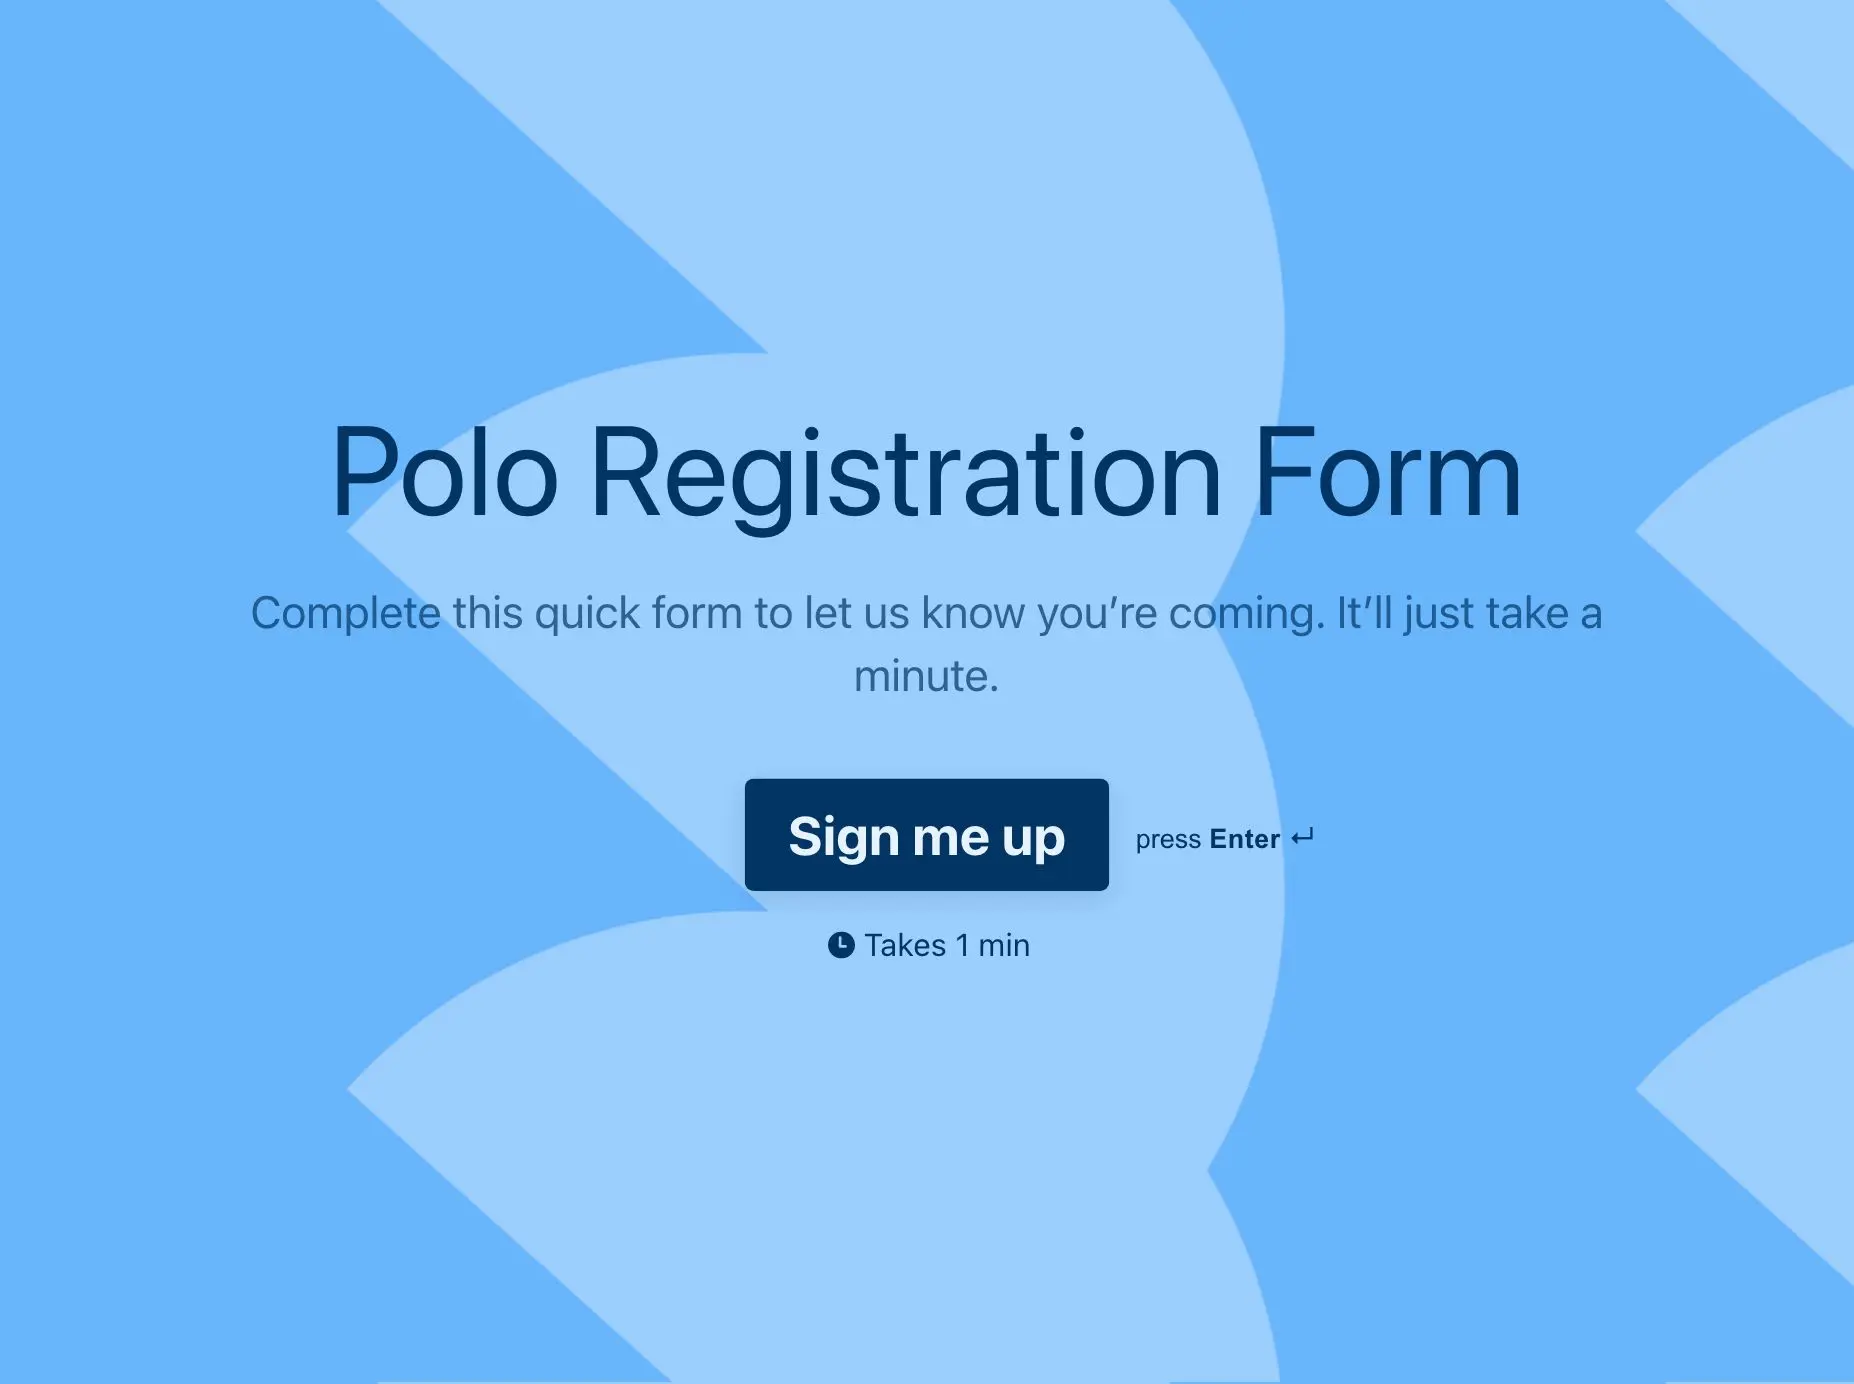 Polo Registration Form Template Hero